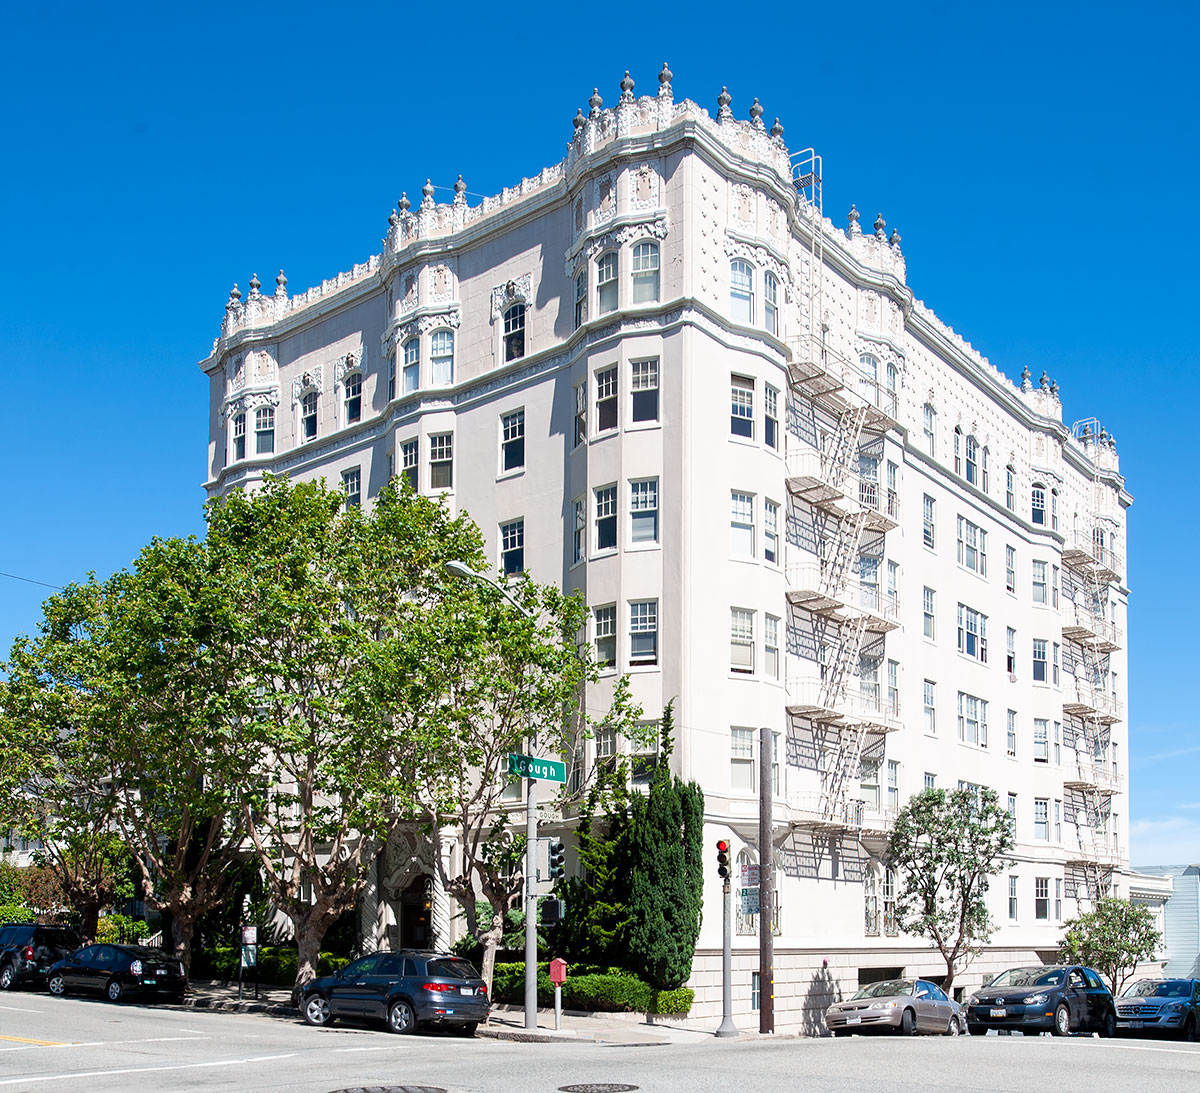 1800 Broadway in Pacific Heights, designed by H. C. Baumann, built 1927